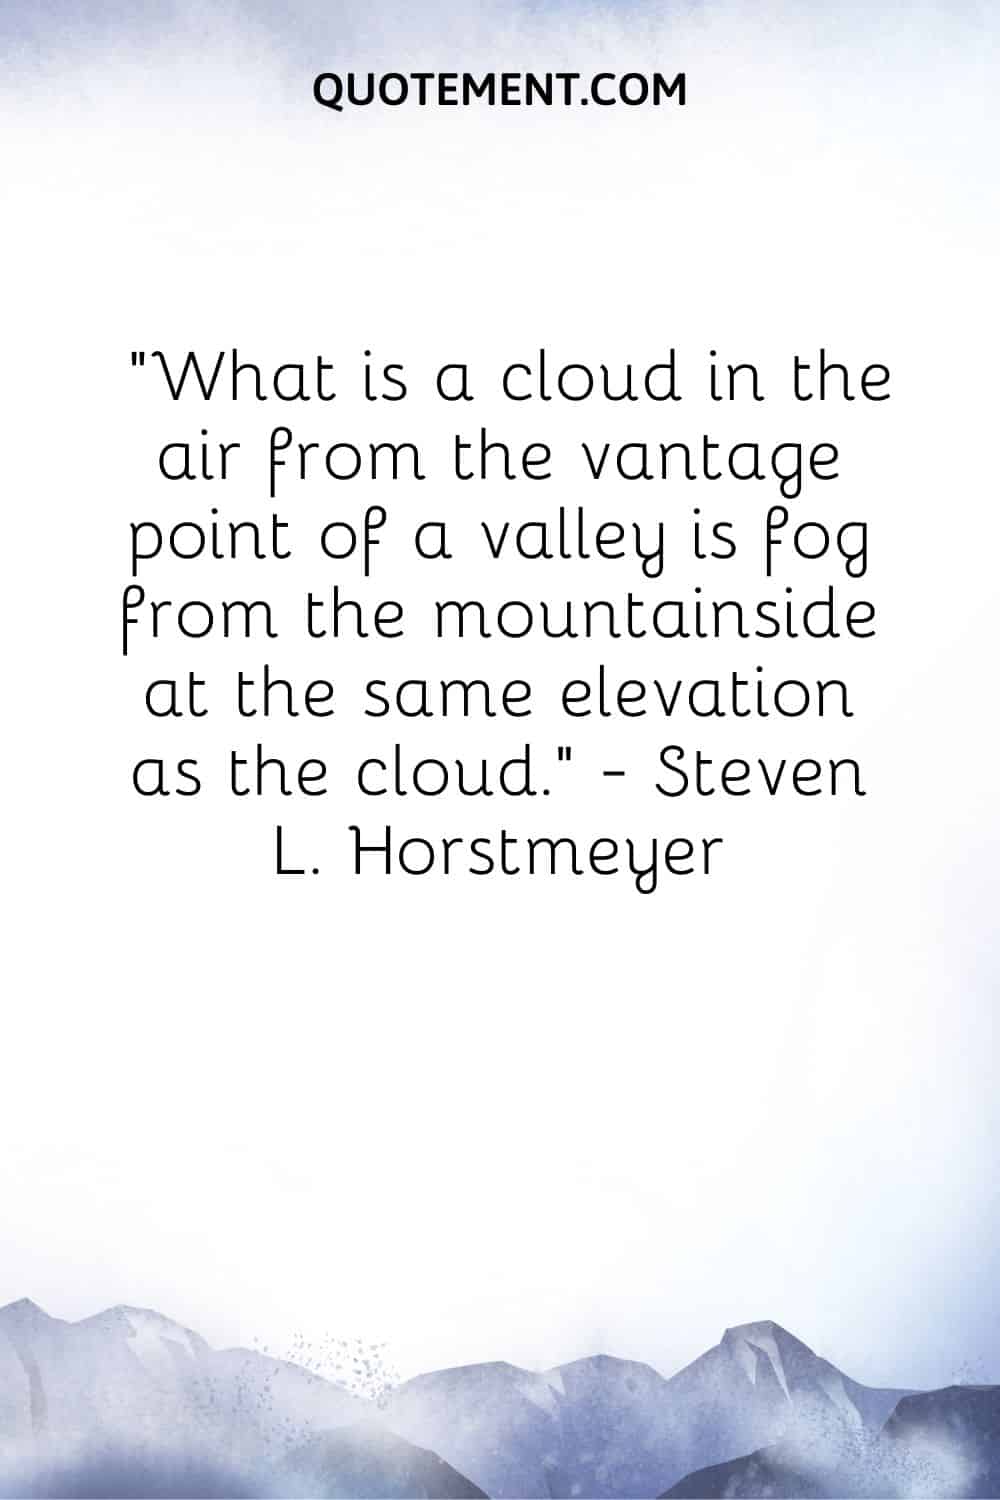 What is a cloud in the air from the vantage point of a valley is fog from the mountainside at the same elevation as the cloud